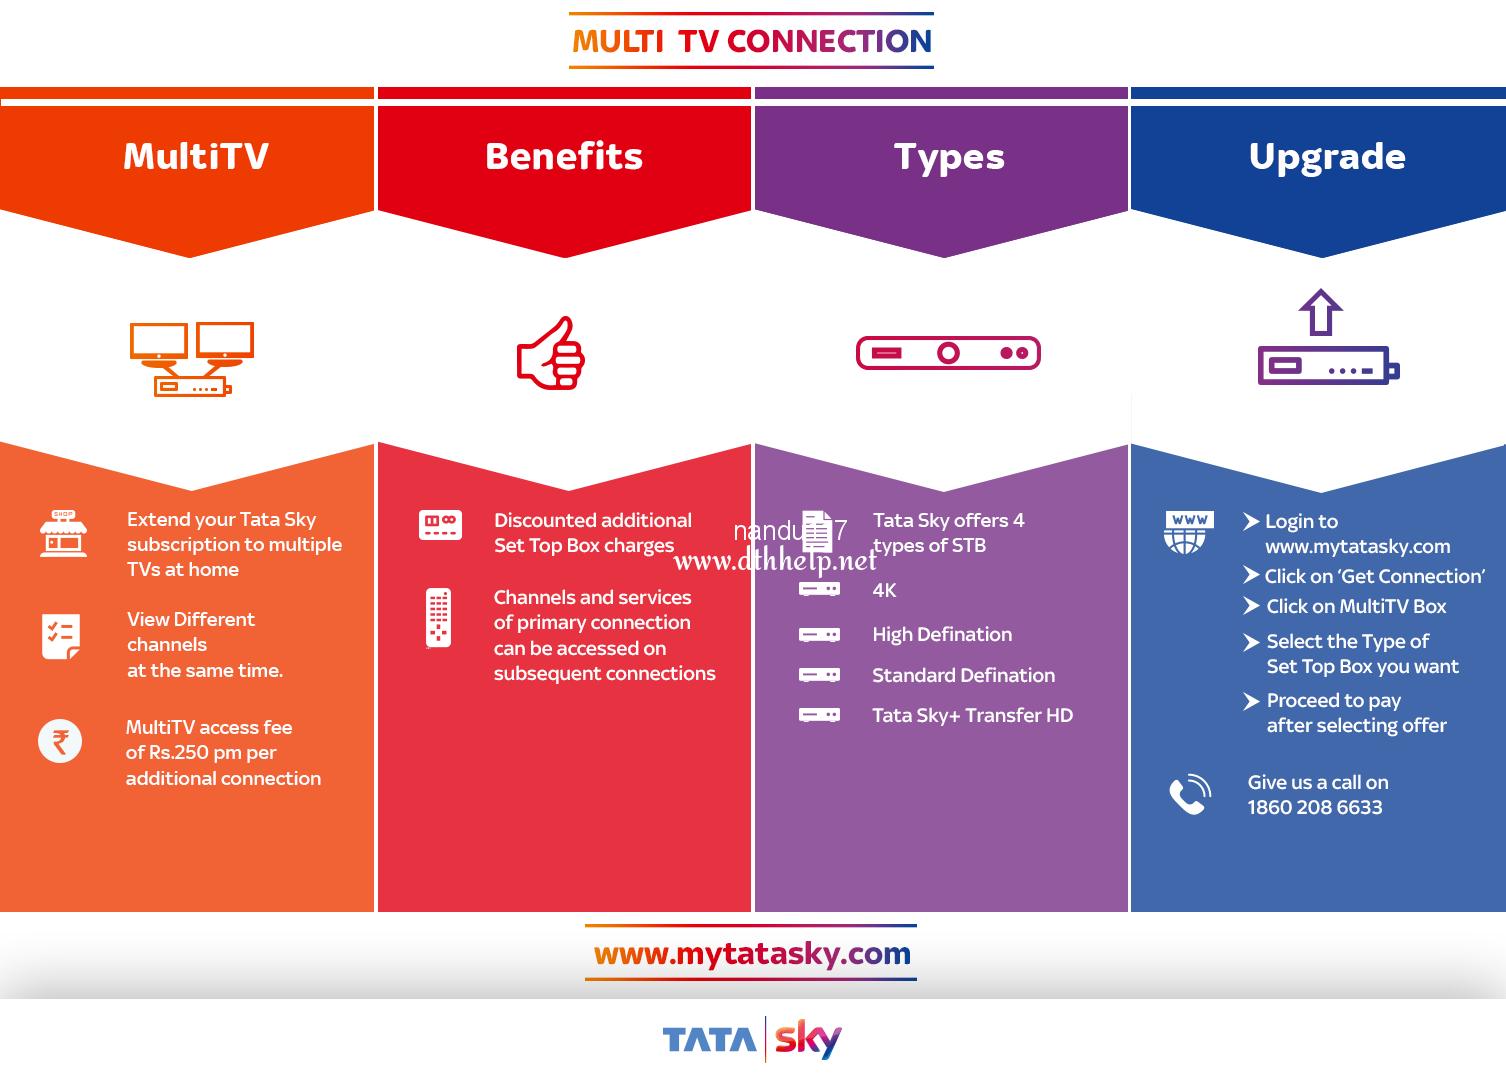 tata-sky-multi-tv-connection-info.png